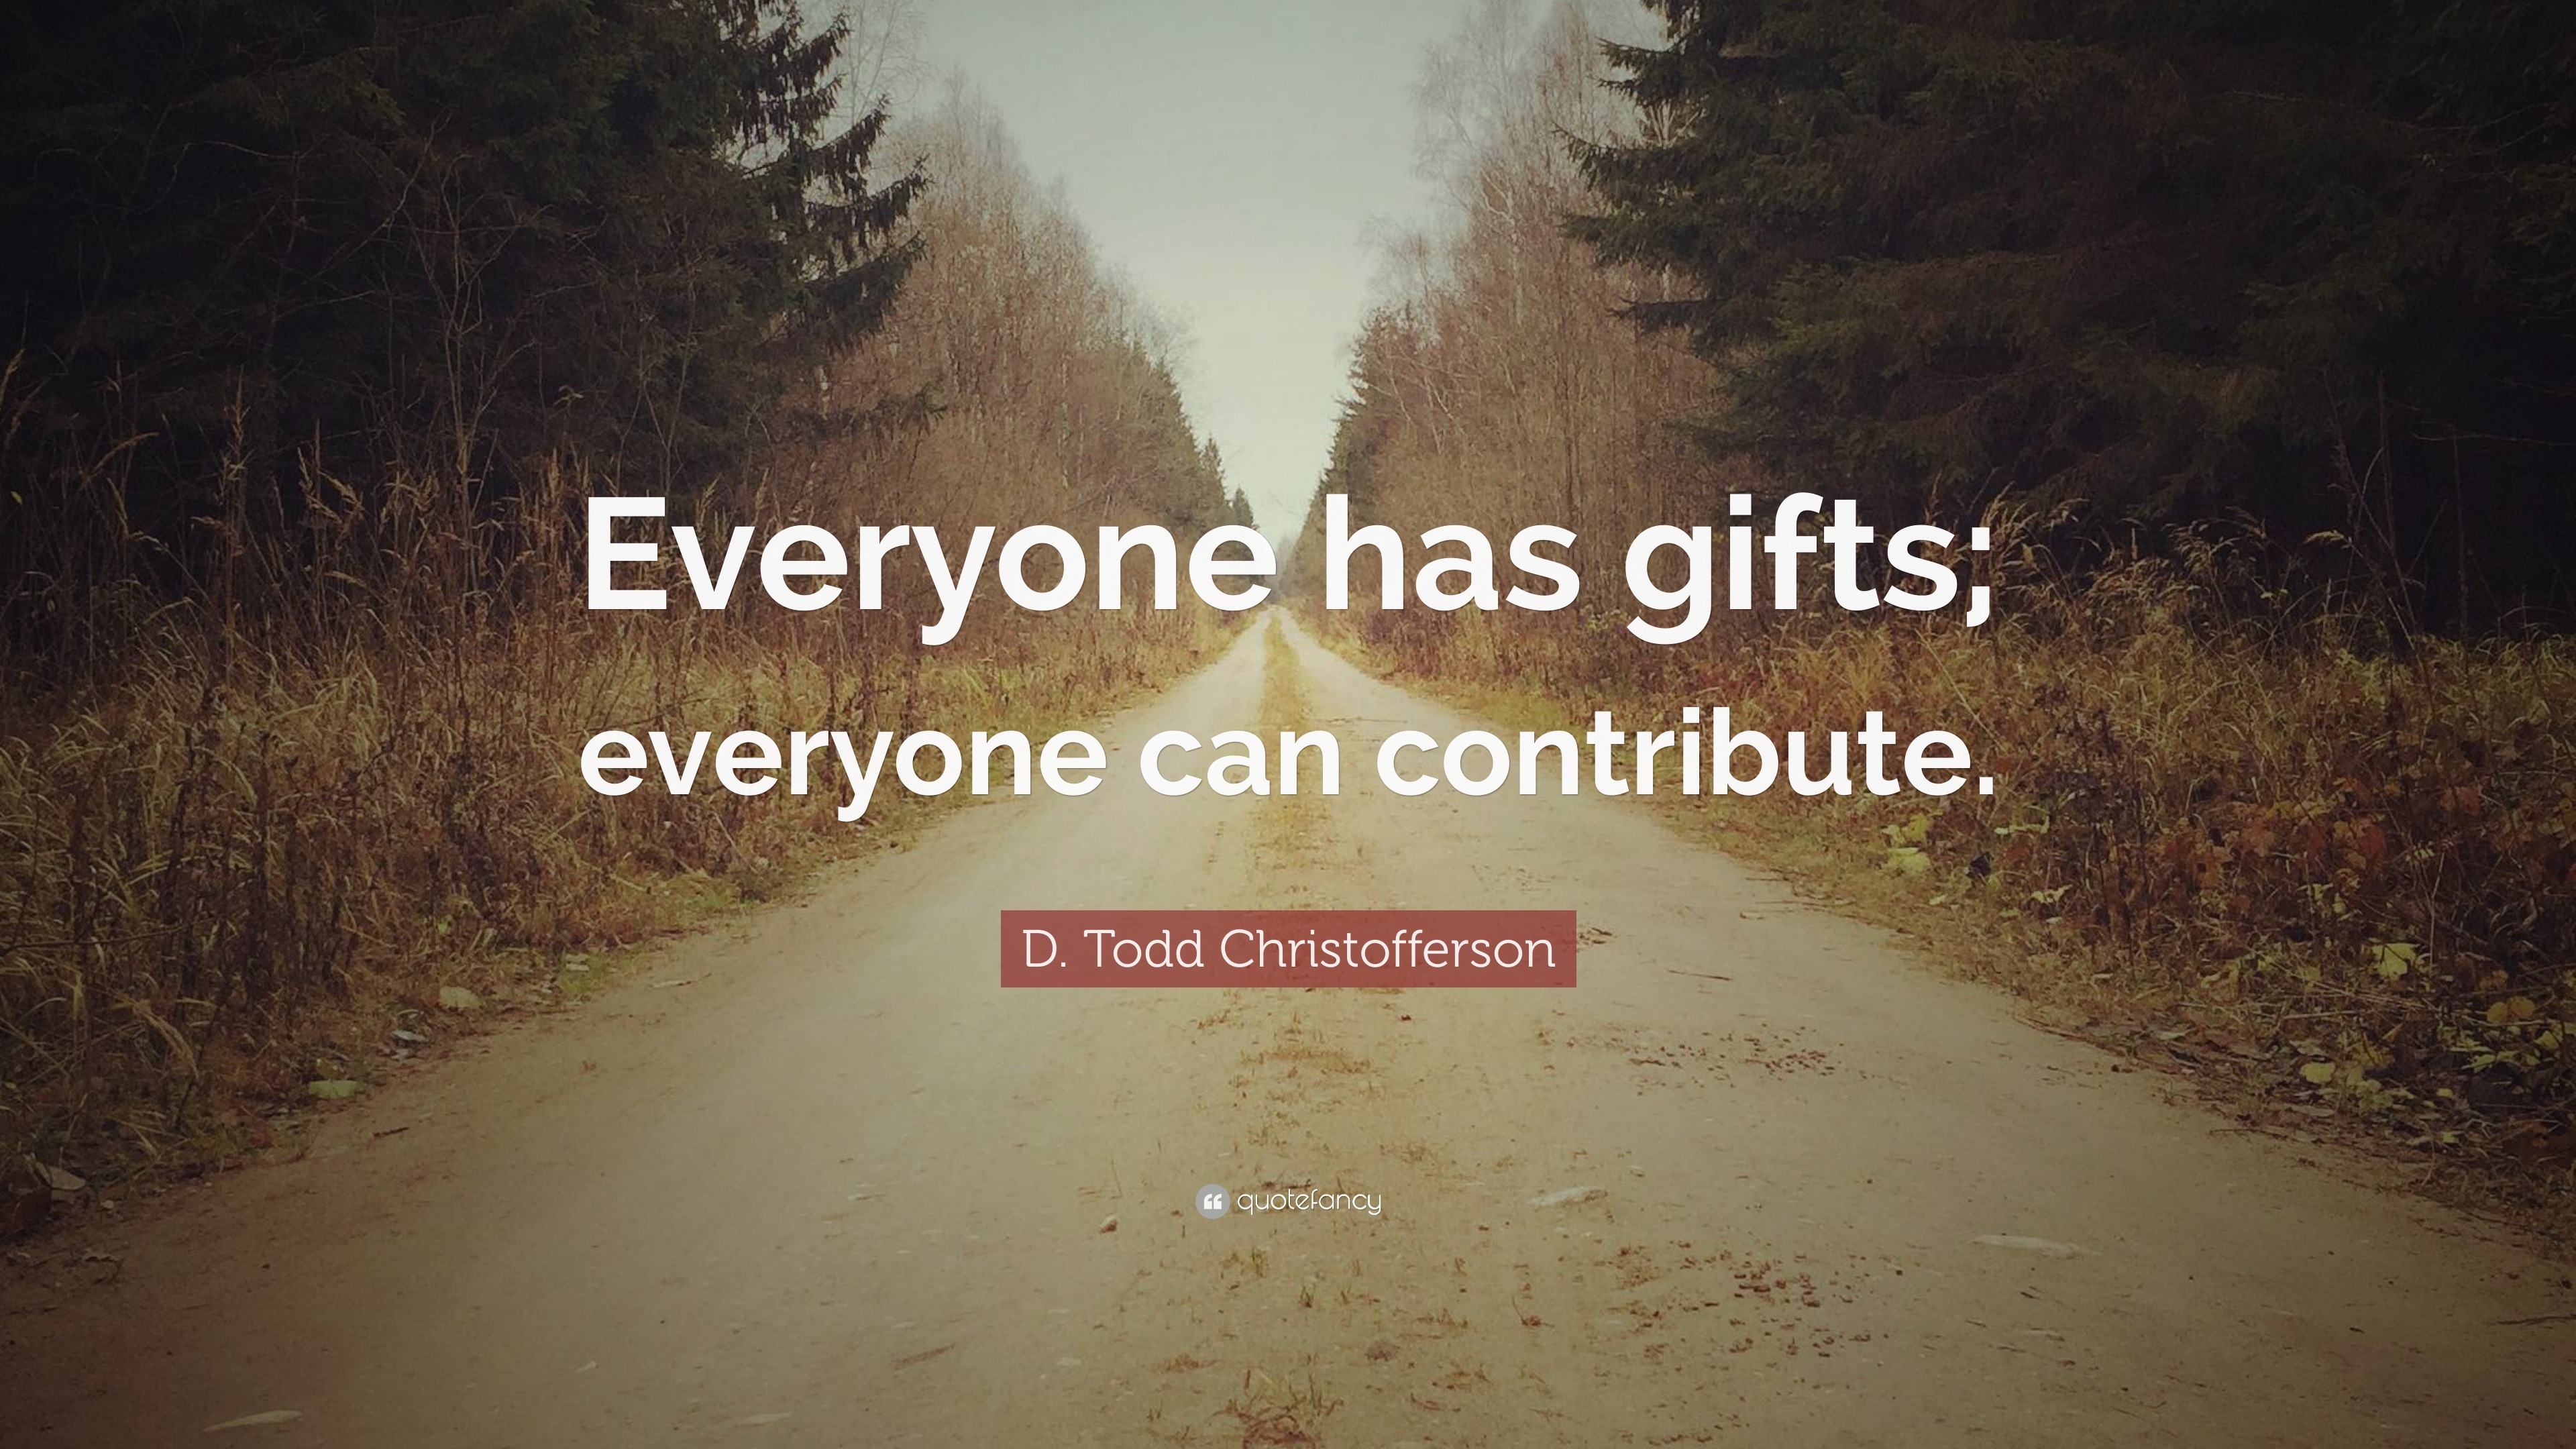 https://quotefancy.com/media/wallpaper/3840x2160/1201019-D-Todd-Christofferson-Quote-Everyone-has-gifts-everyone-can.jpg